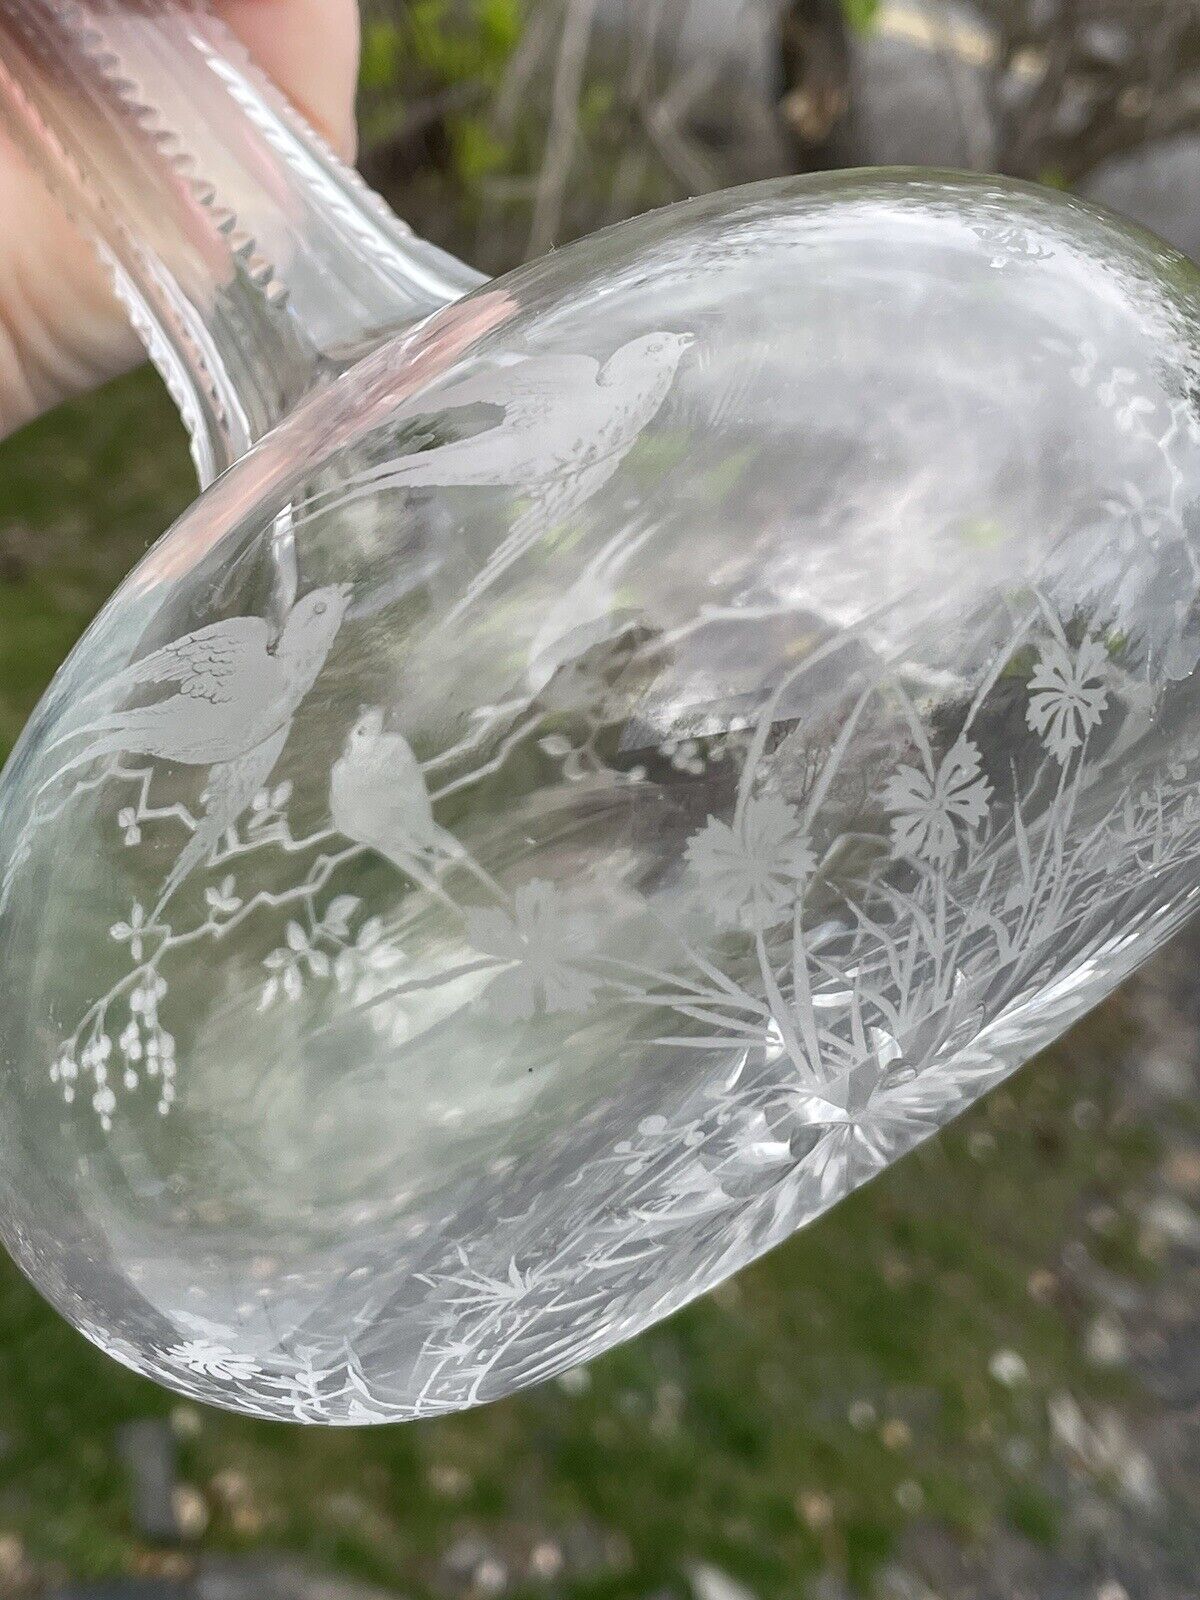 Antique Etched Cut Glass Decanter Bottle 19th C. Victorian Birds & Branches